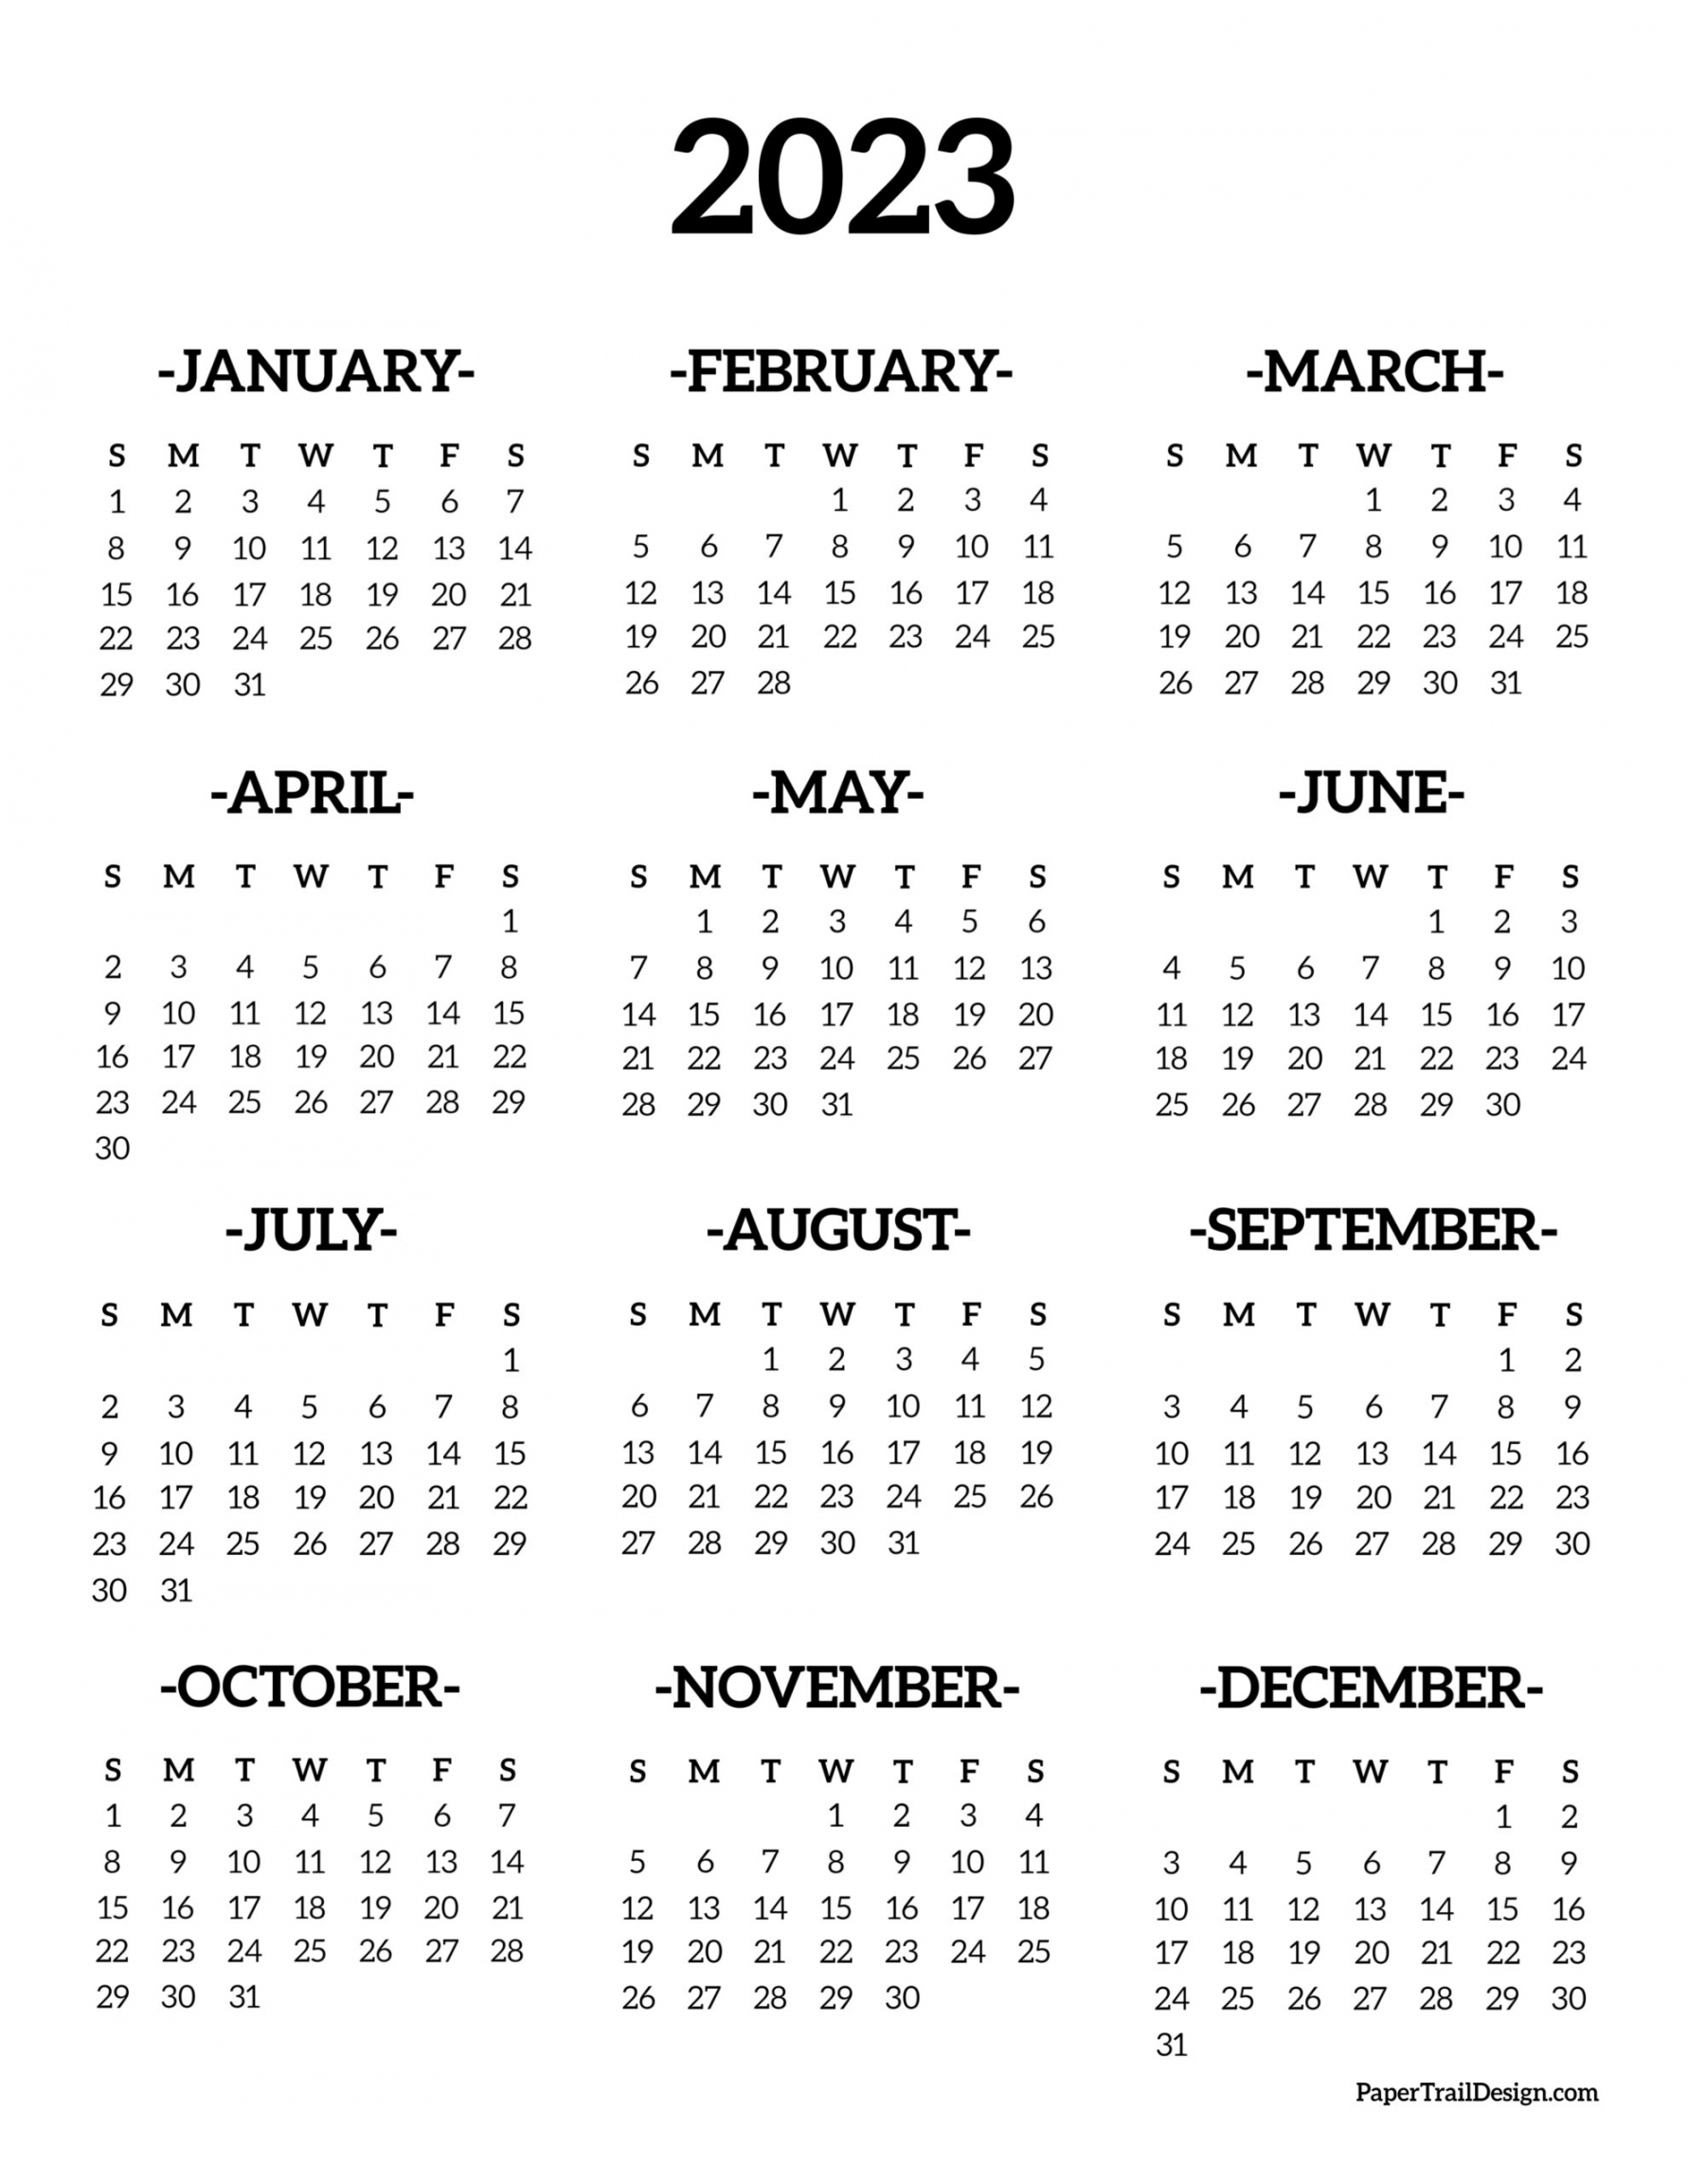 Free Printable 2023 Calendar Printable - Printable - Calendar  Printable One Page - Paper Trail Design